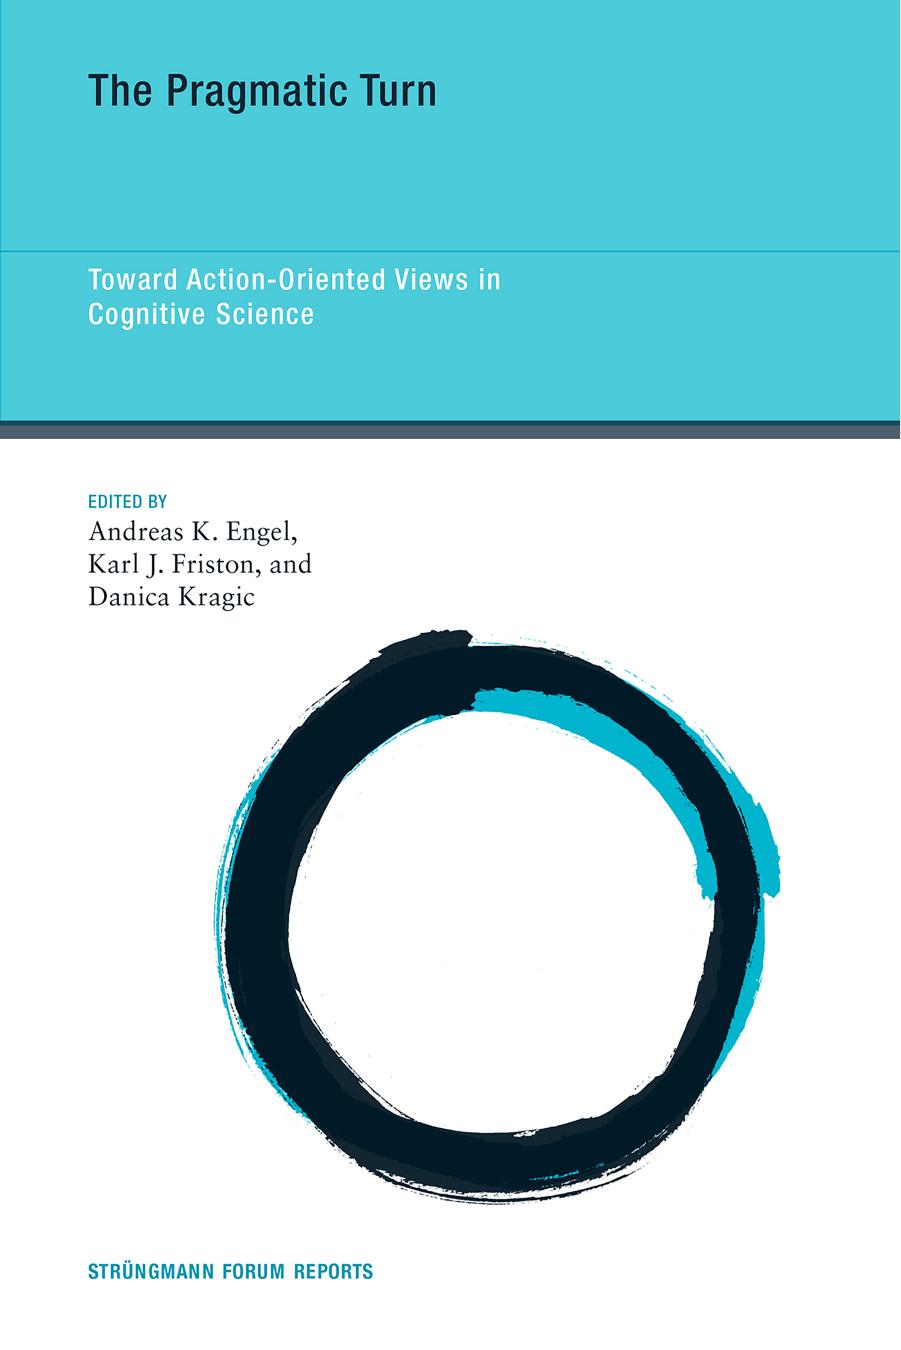 The Pragmatic Turn: Toward Action-Oriented Views in Cognitive Science